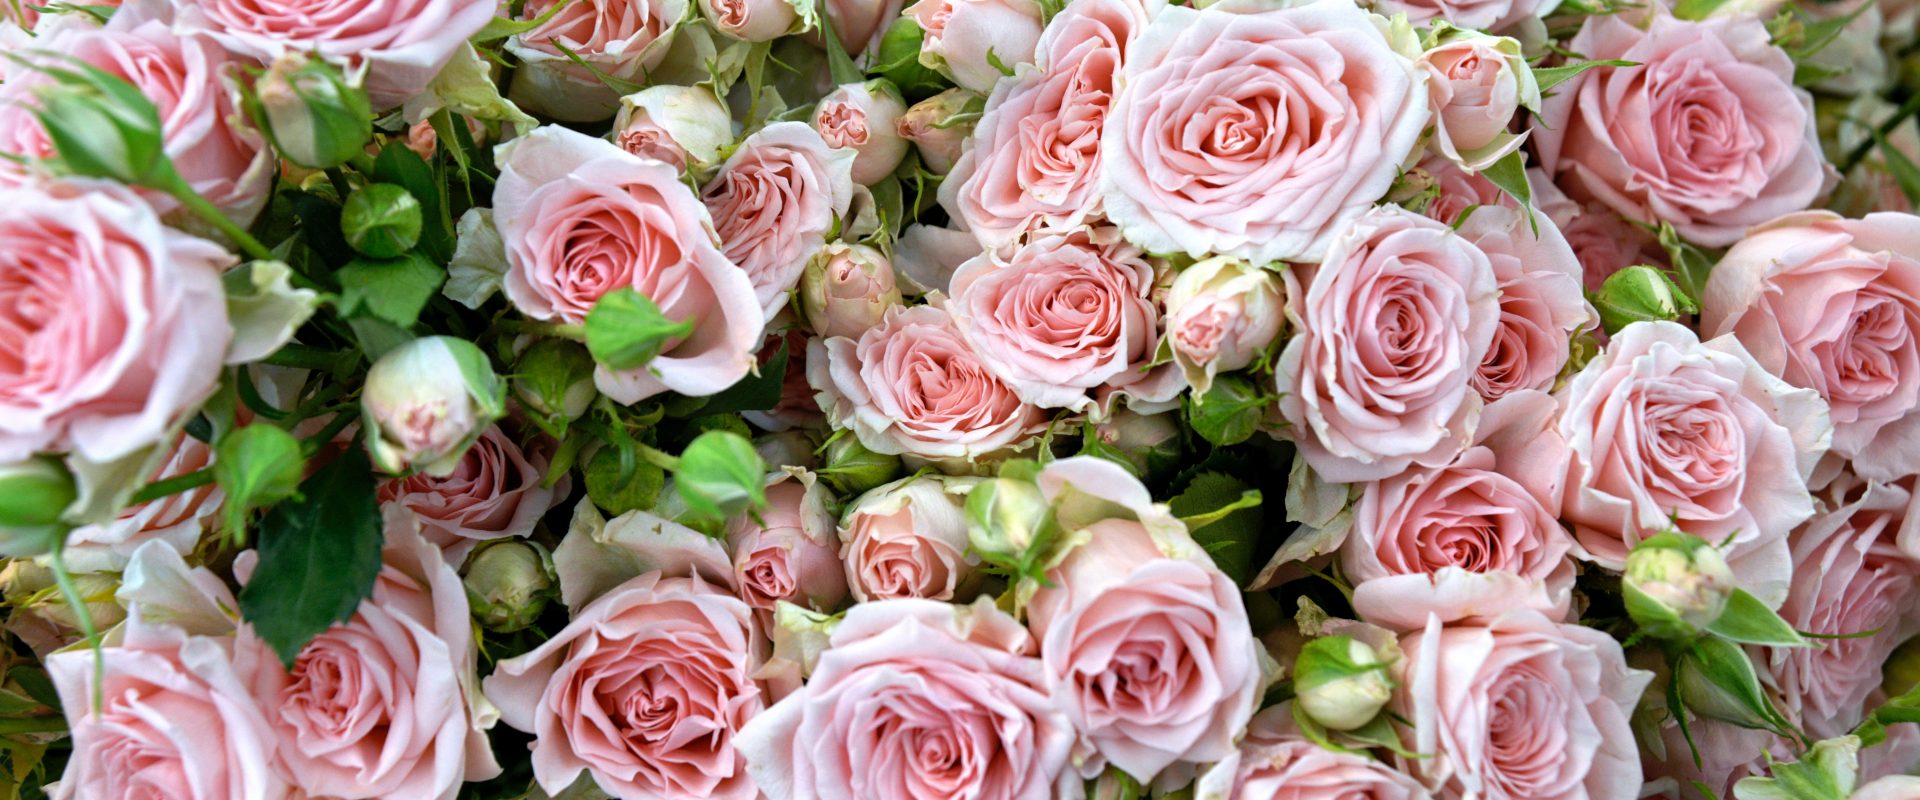 A beginner's guide to growing roses from clippings